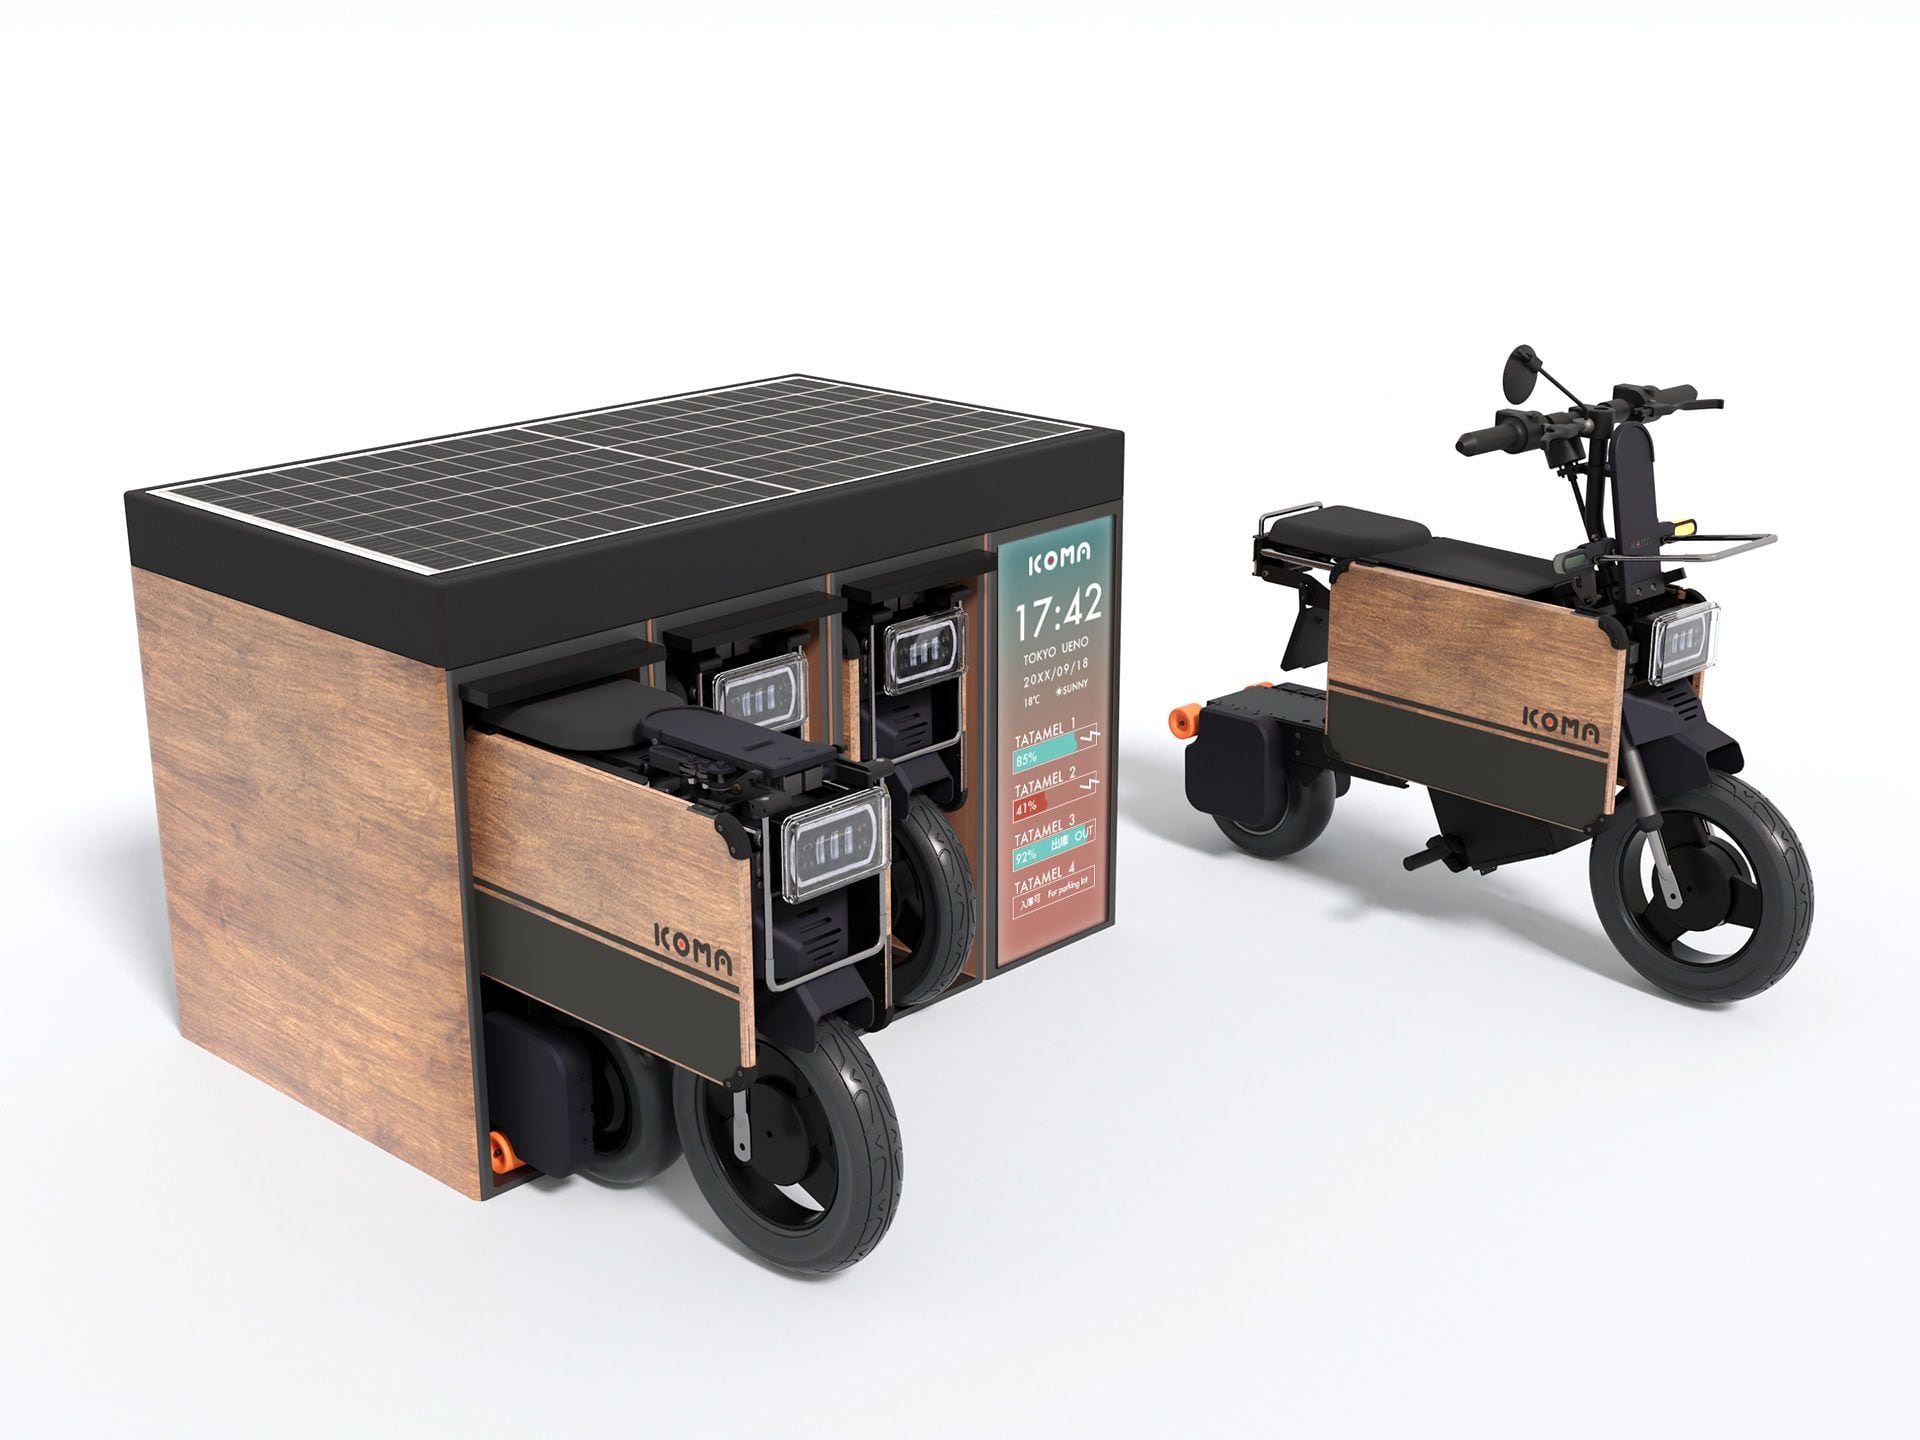 Want a fleet of them? This self-contained charging station with solar panel looks pretty cool.